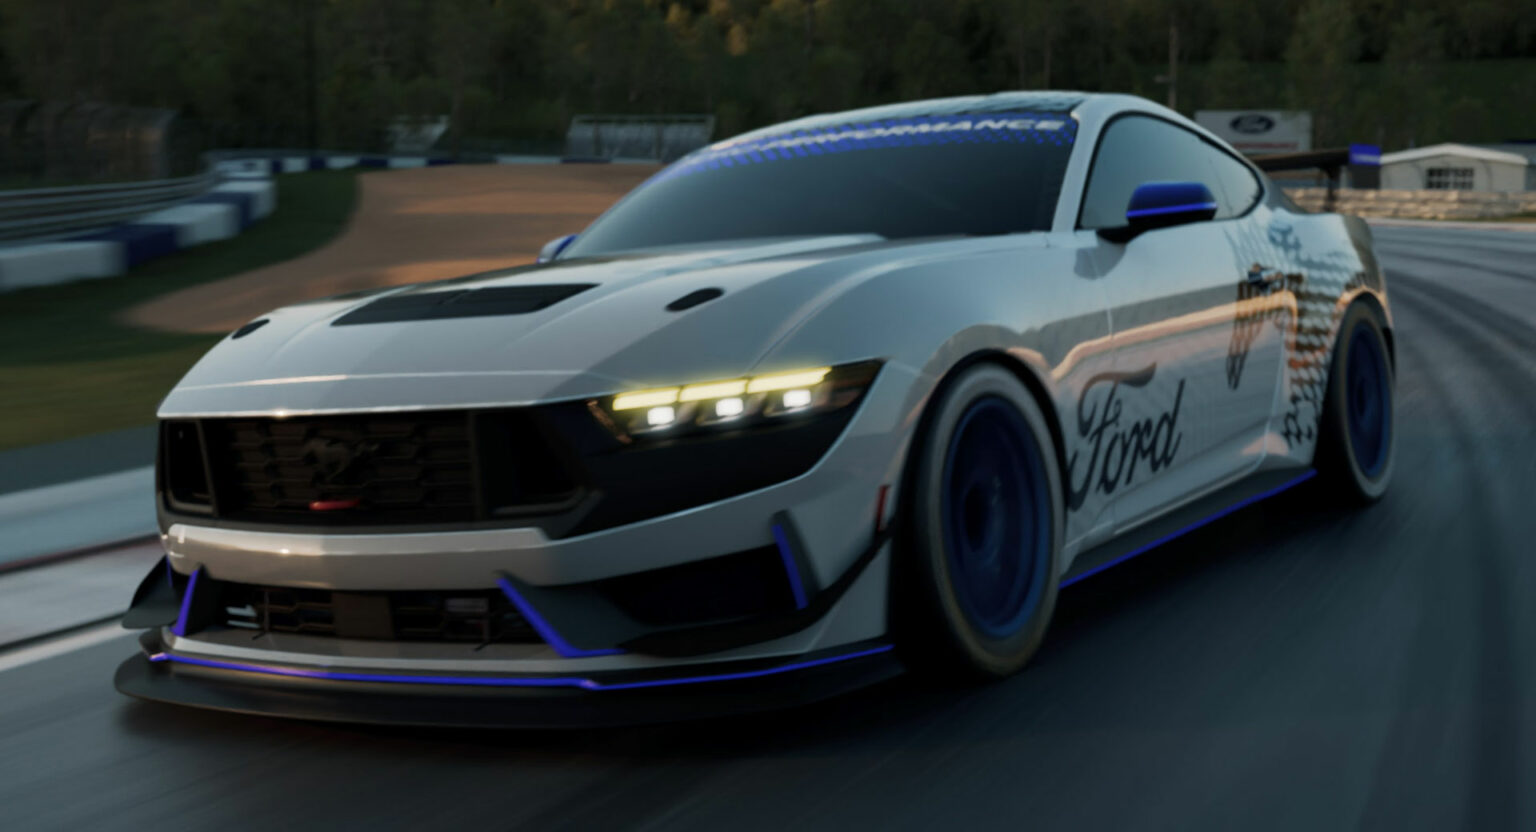 Ford Mustang GT4 To Go Racing In 2023, Followed By New GT3 In 2024